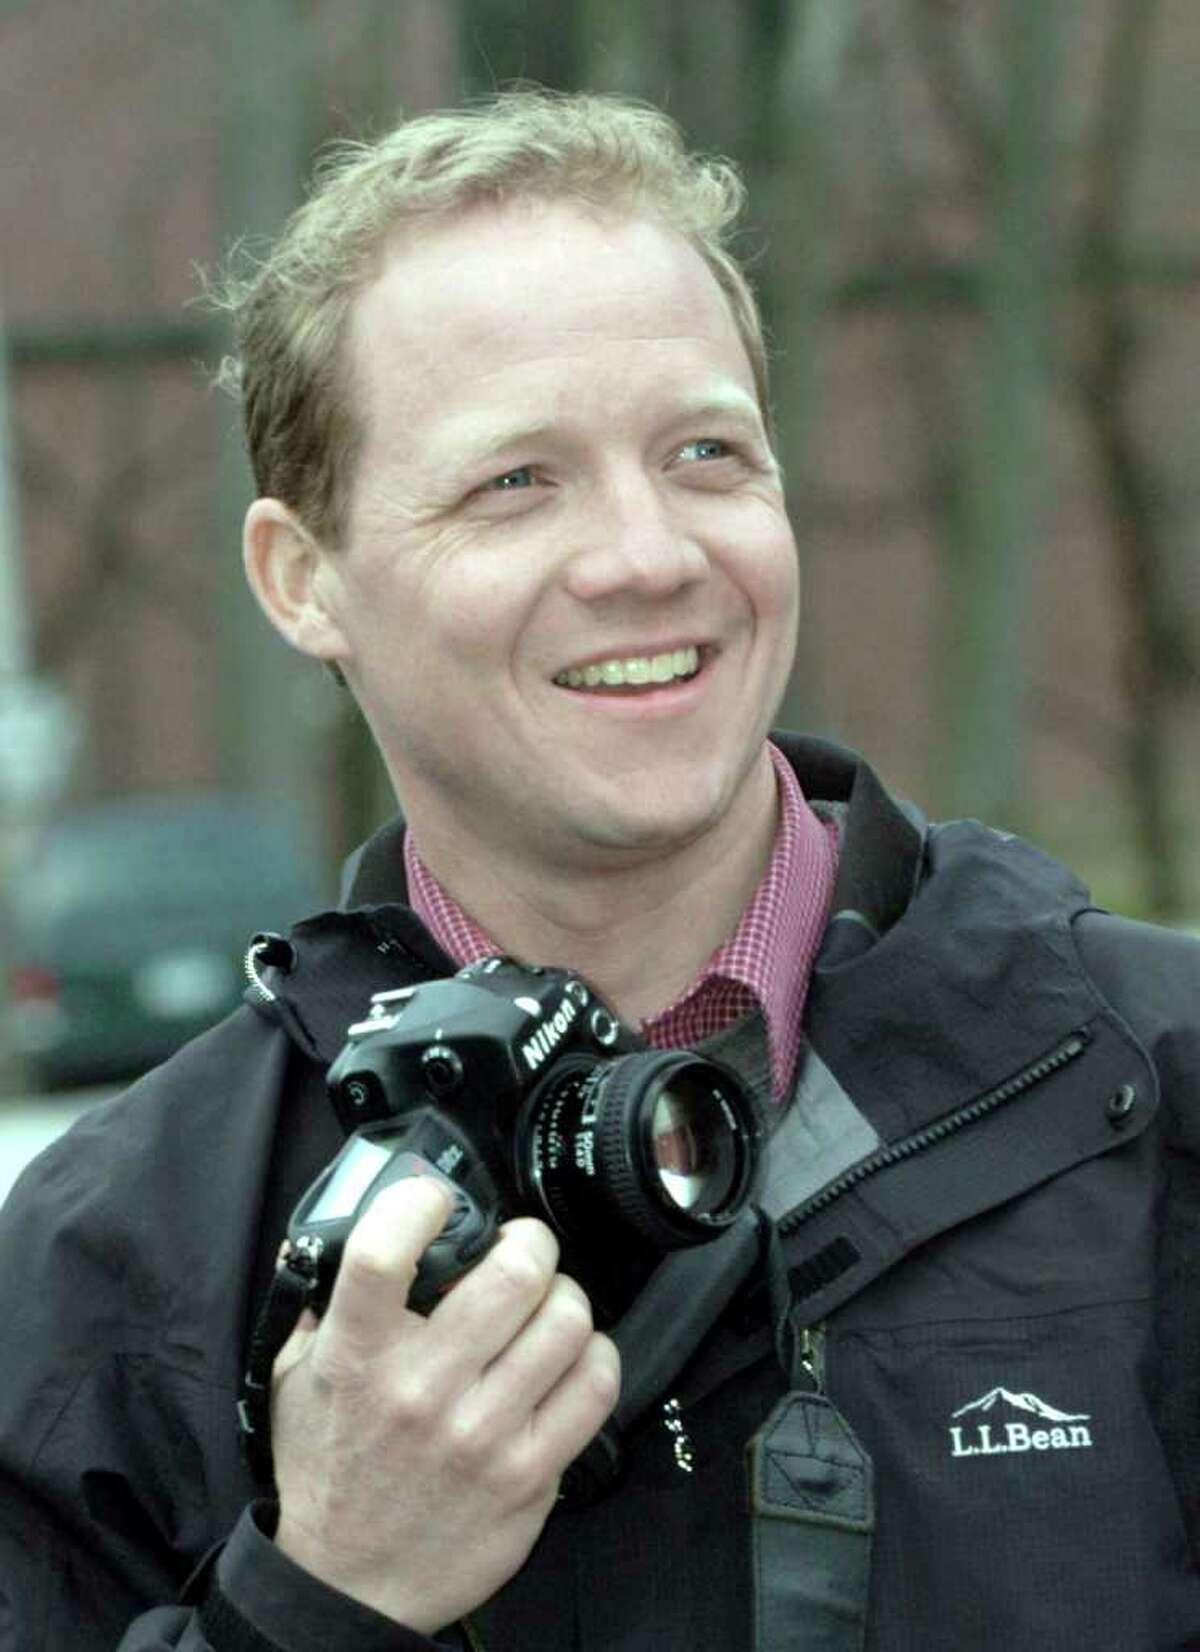 Former News-Times staff photographer Chris Ware, currently working at New York's Newsday, won an Emmy for his work on the paper's 9/11 project.